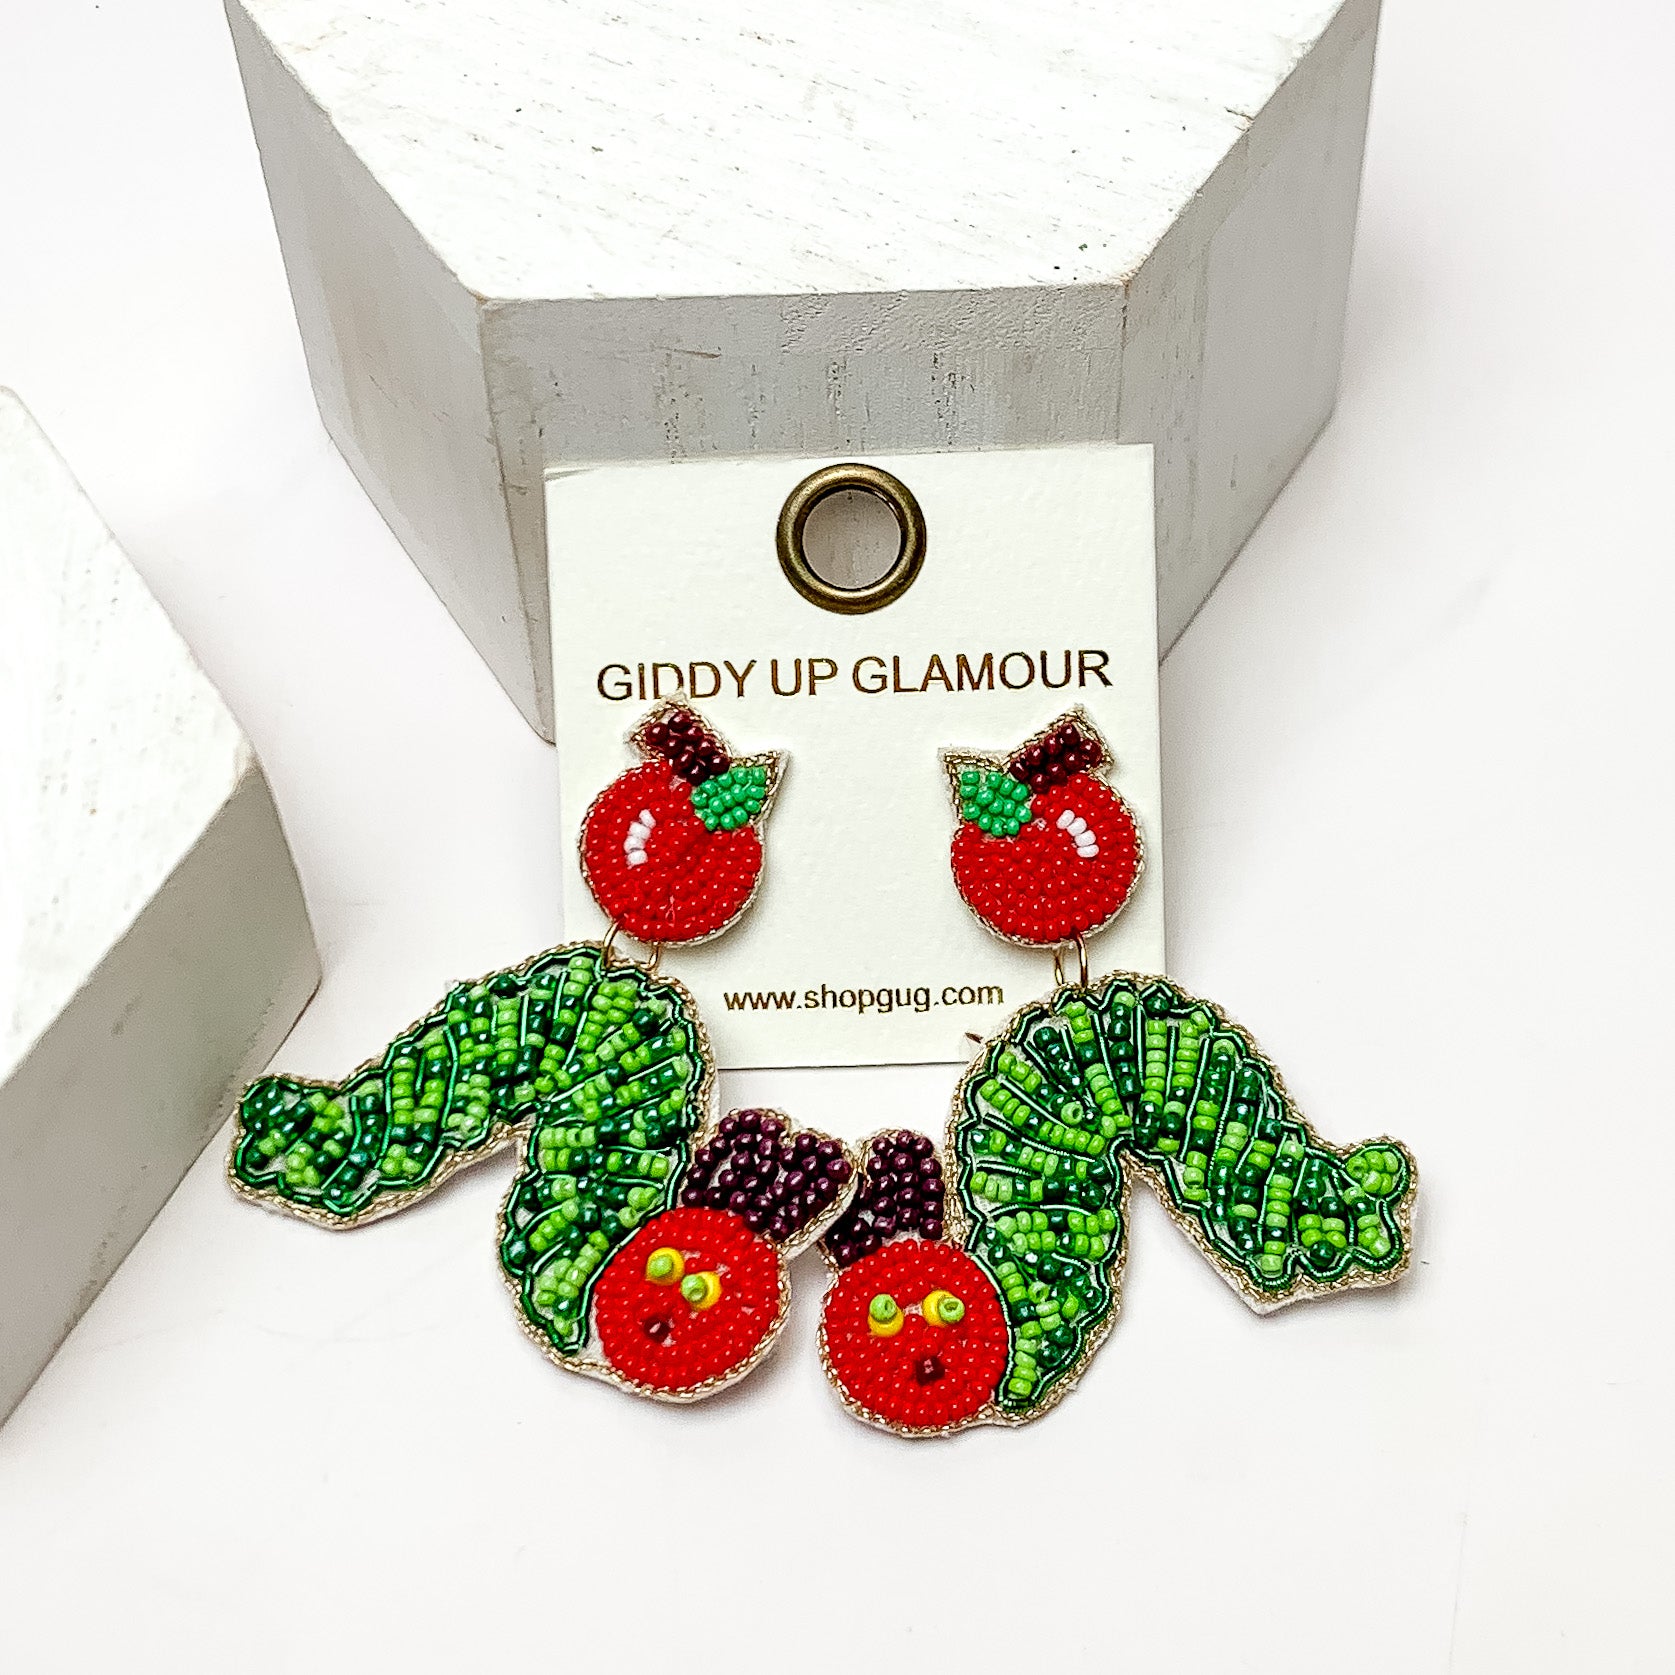 Caterpillar Beaded Earrings With Apple Posts in Green and Red. These earrings are on a white background and have white posts around them.